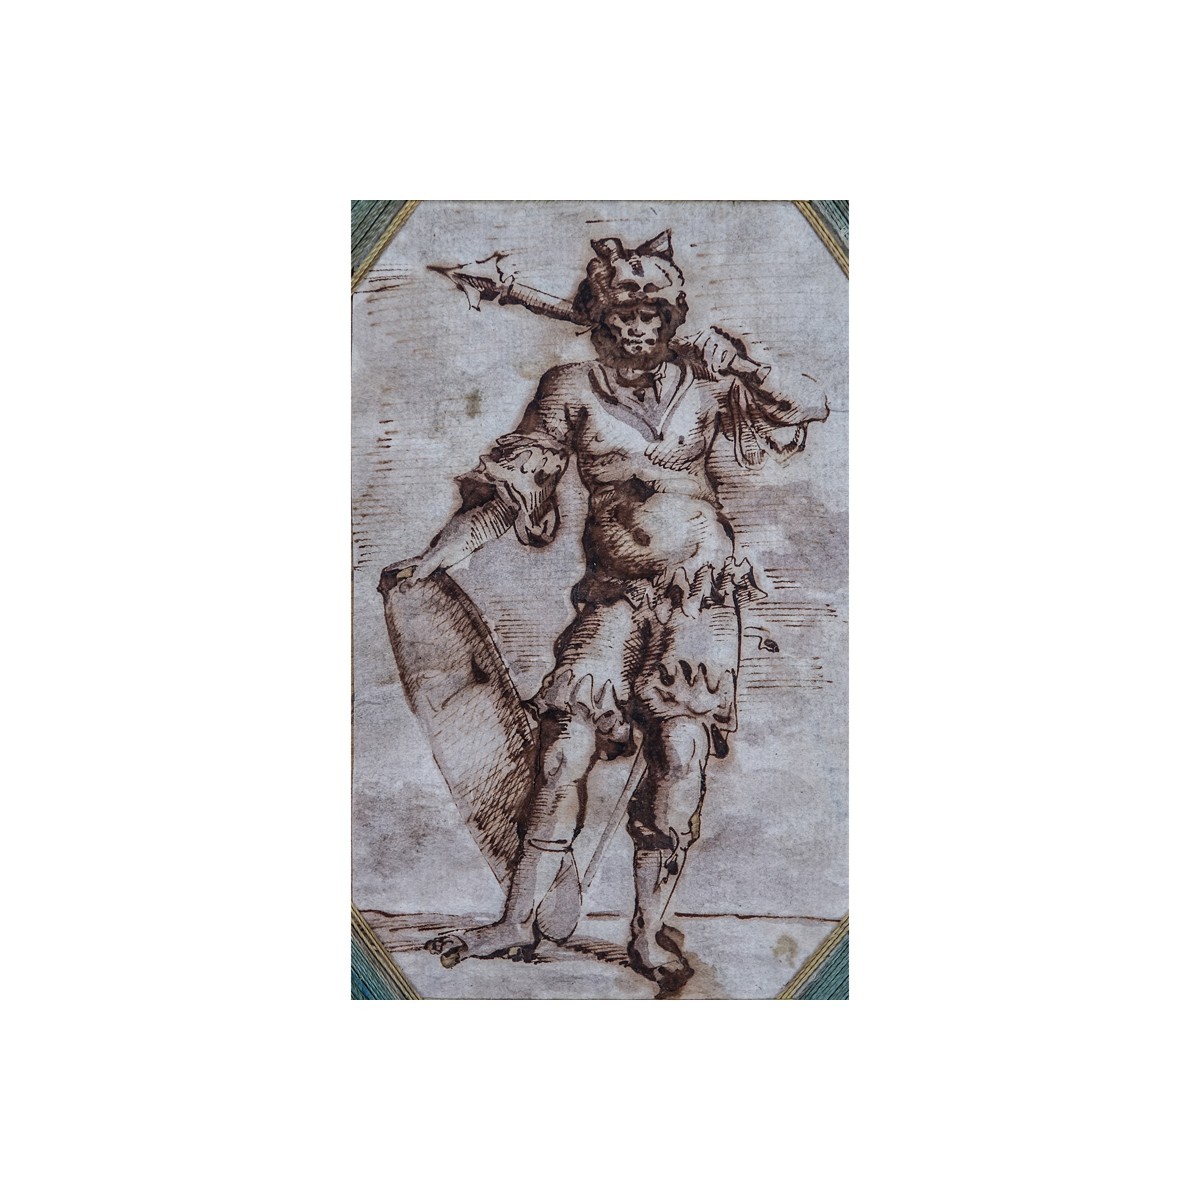 17th Century Old Master Ink On Paper In Handmade Frame "Warrior". The frame of paper and silk thread.